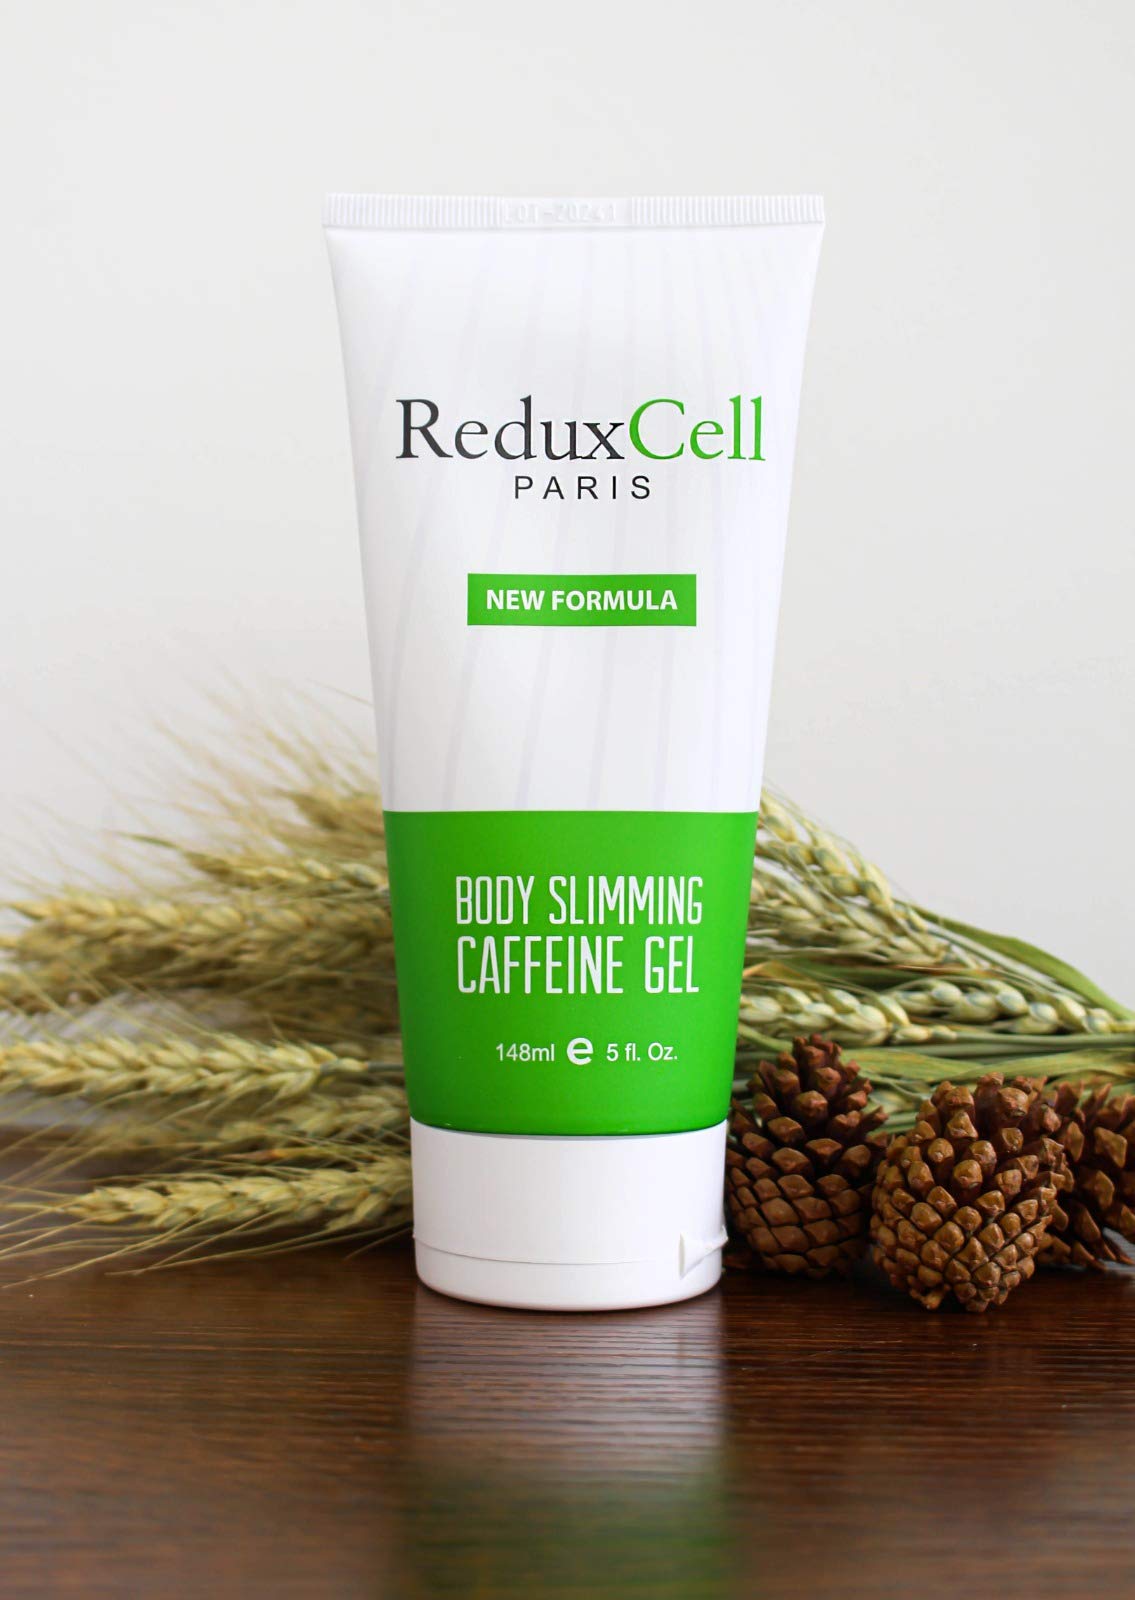 Reduxcell Fat Burning Cream for Belly - Anti Cellulite Firming Cream with Coenzyme Q10 and Caffeine - Body Slimming Cream - Burn Fat 3X Faster with Stomach Fat Burner Cream - Tummy Tightening Formula